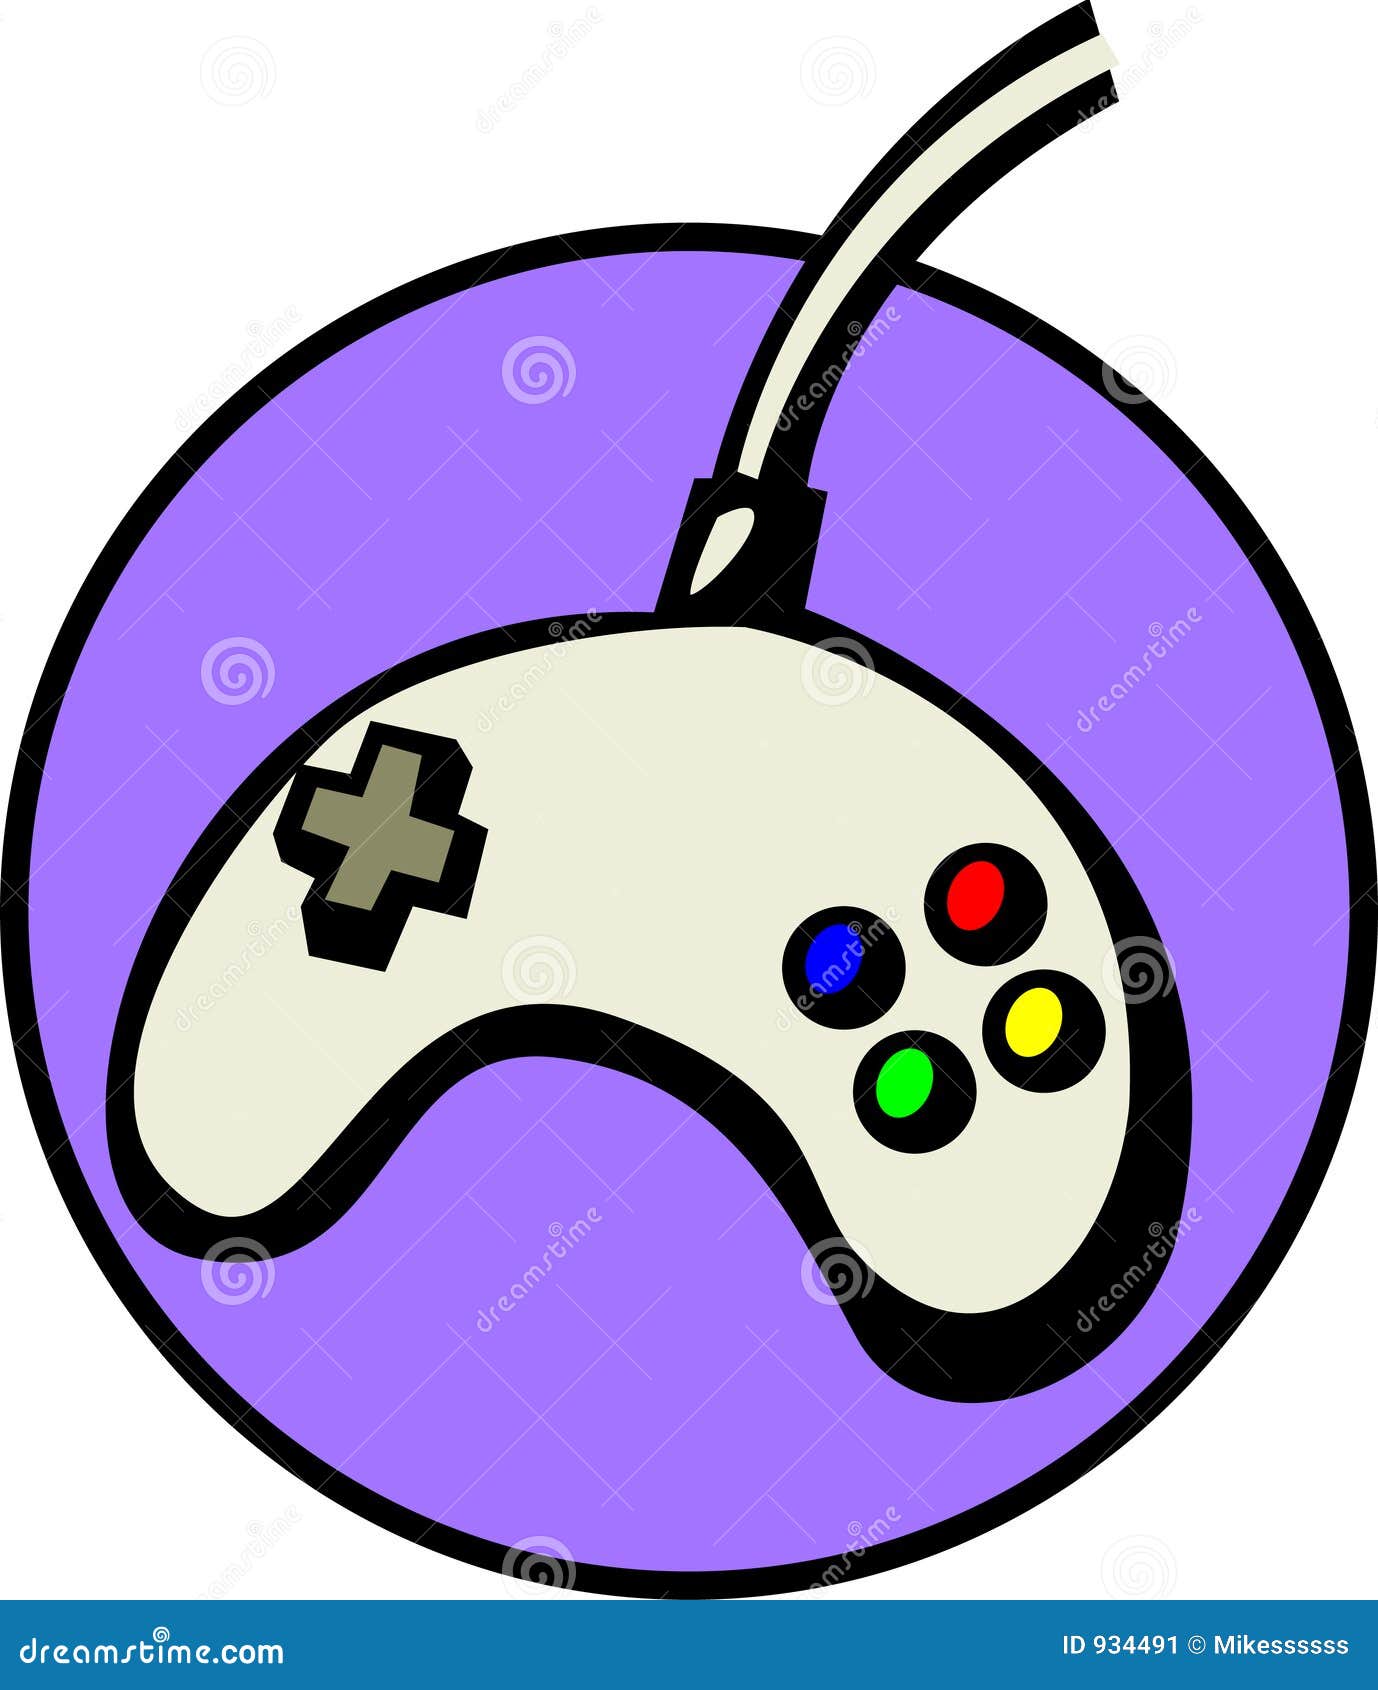 video game clip art pictures - photo #39